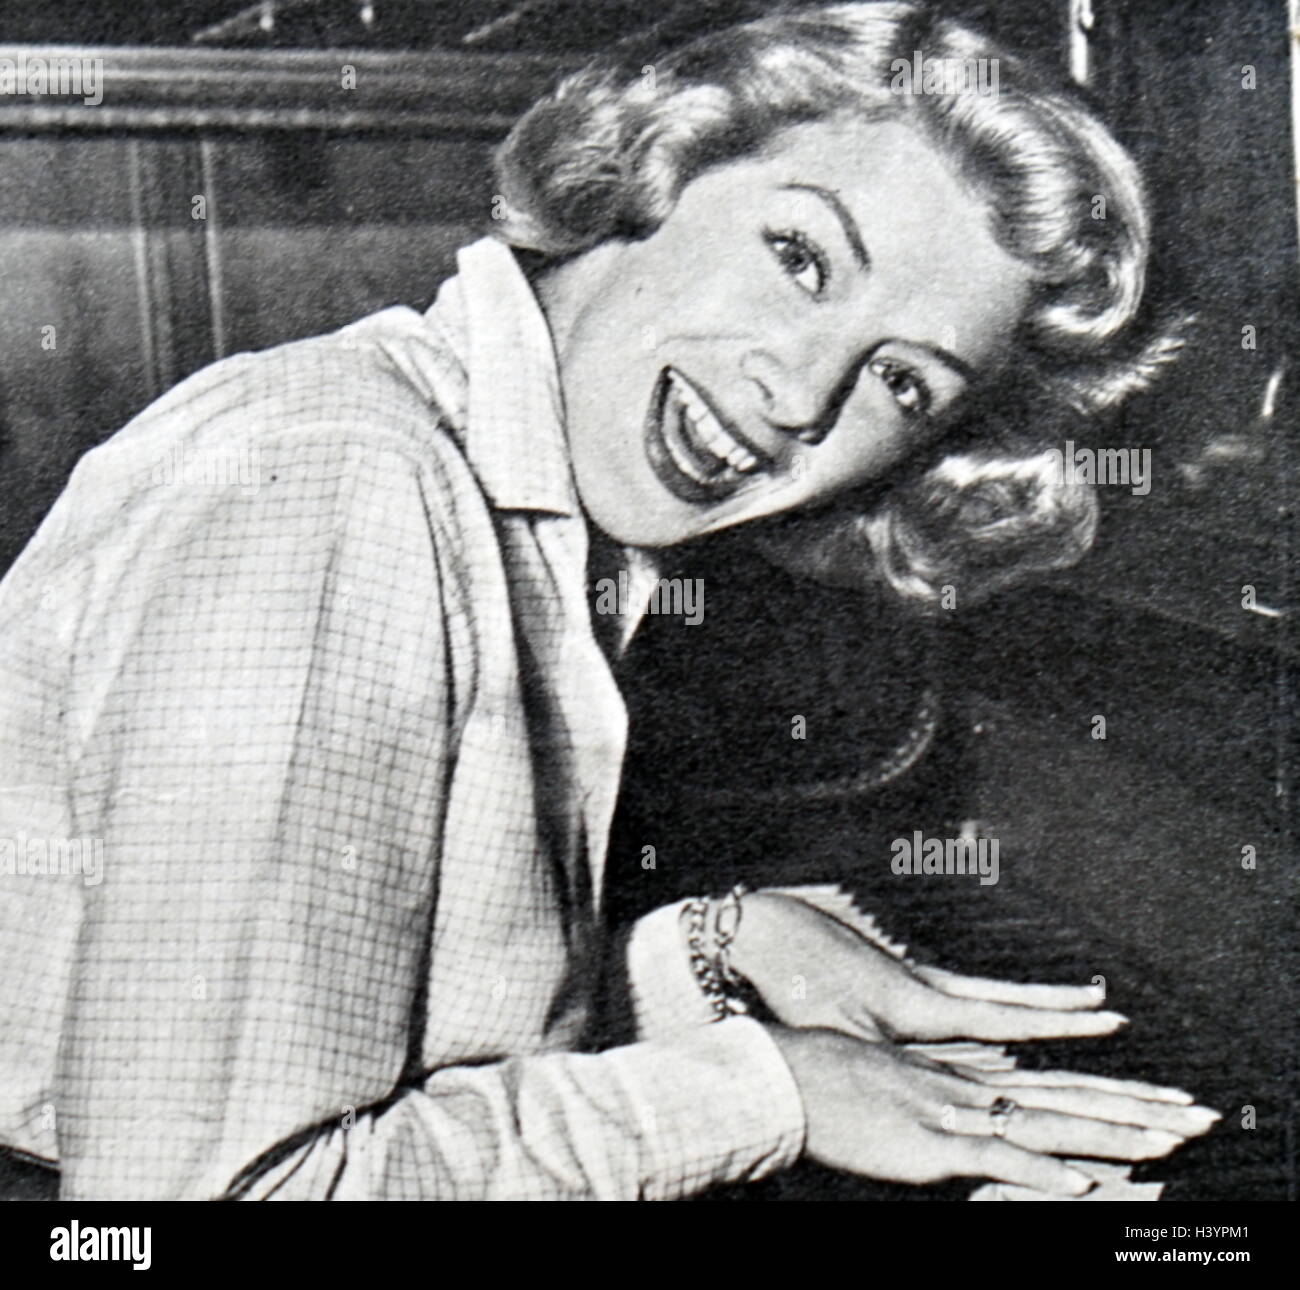 Photograph of Rosemary Clooney (1928-2002) an American popular music singer. Dated 20th Century Stock Photo